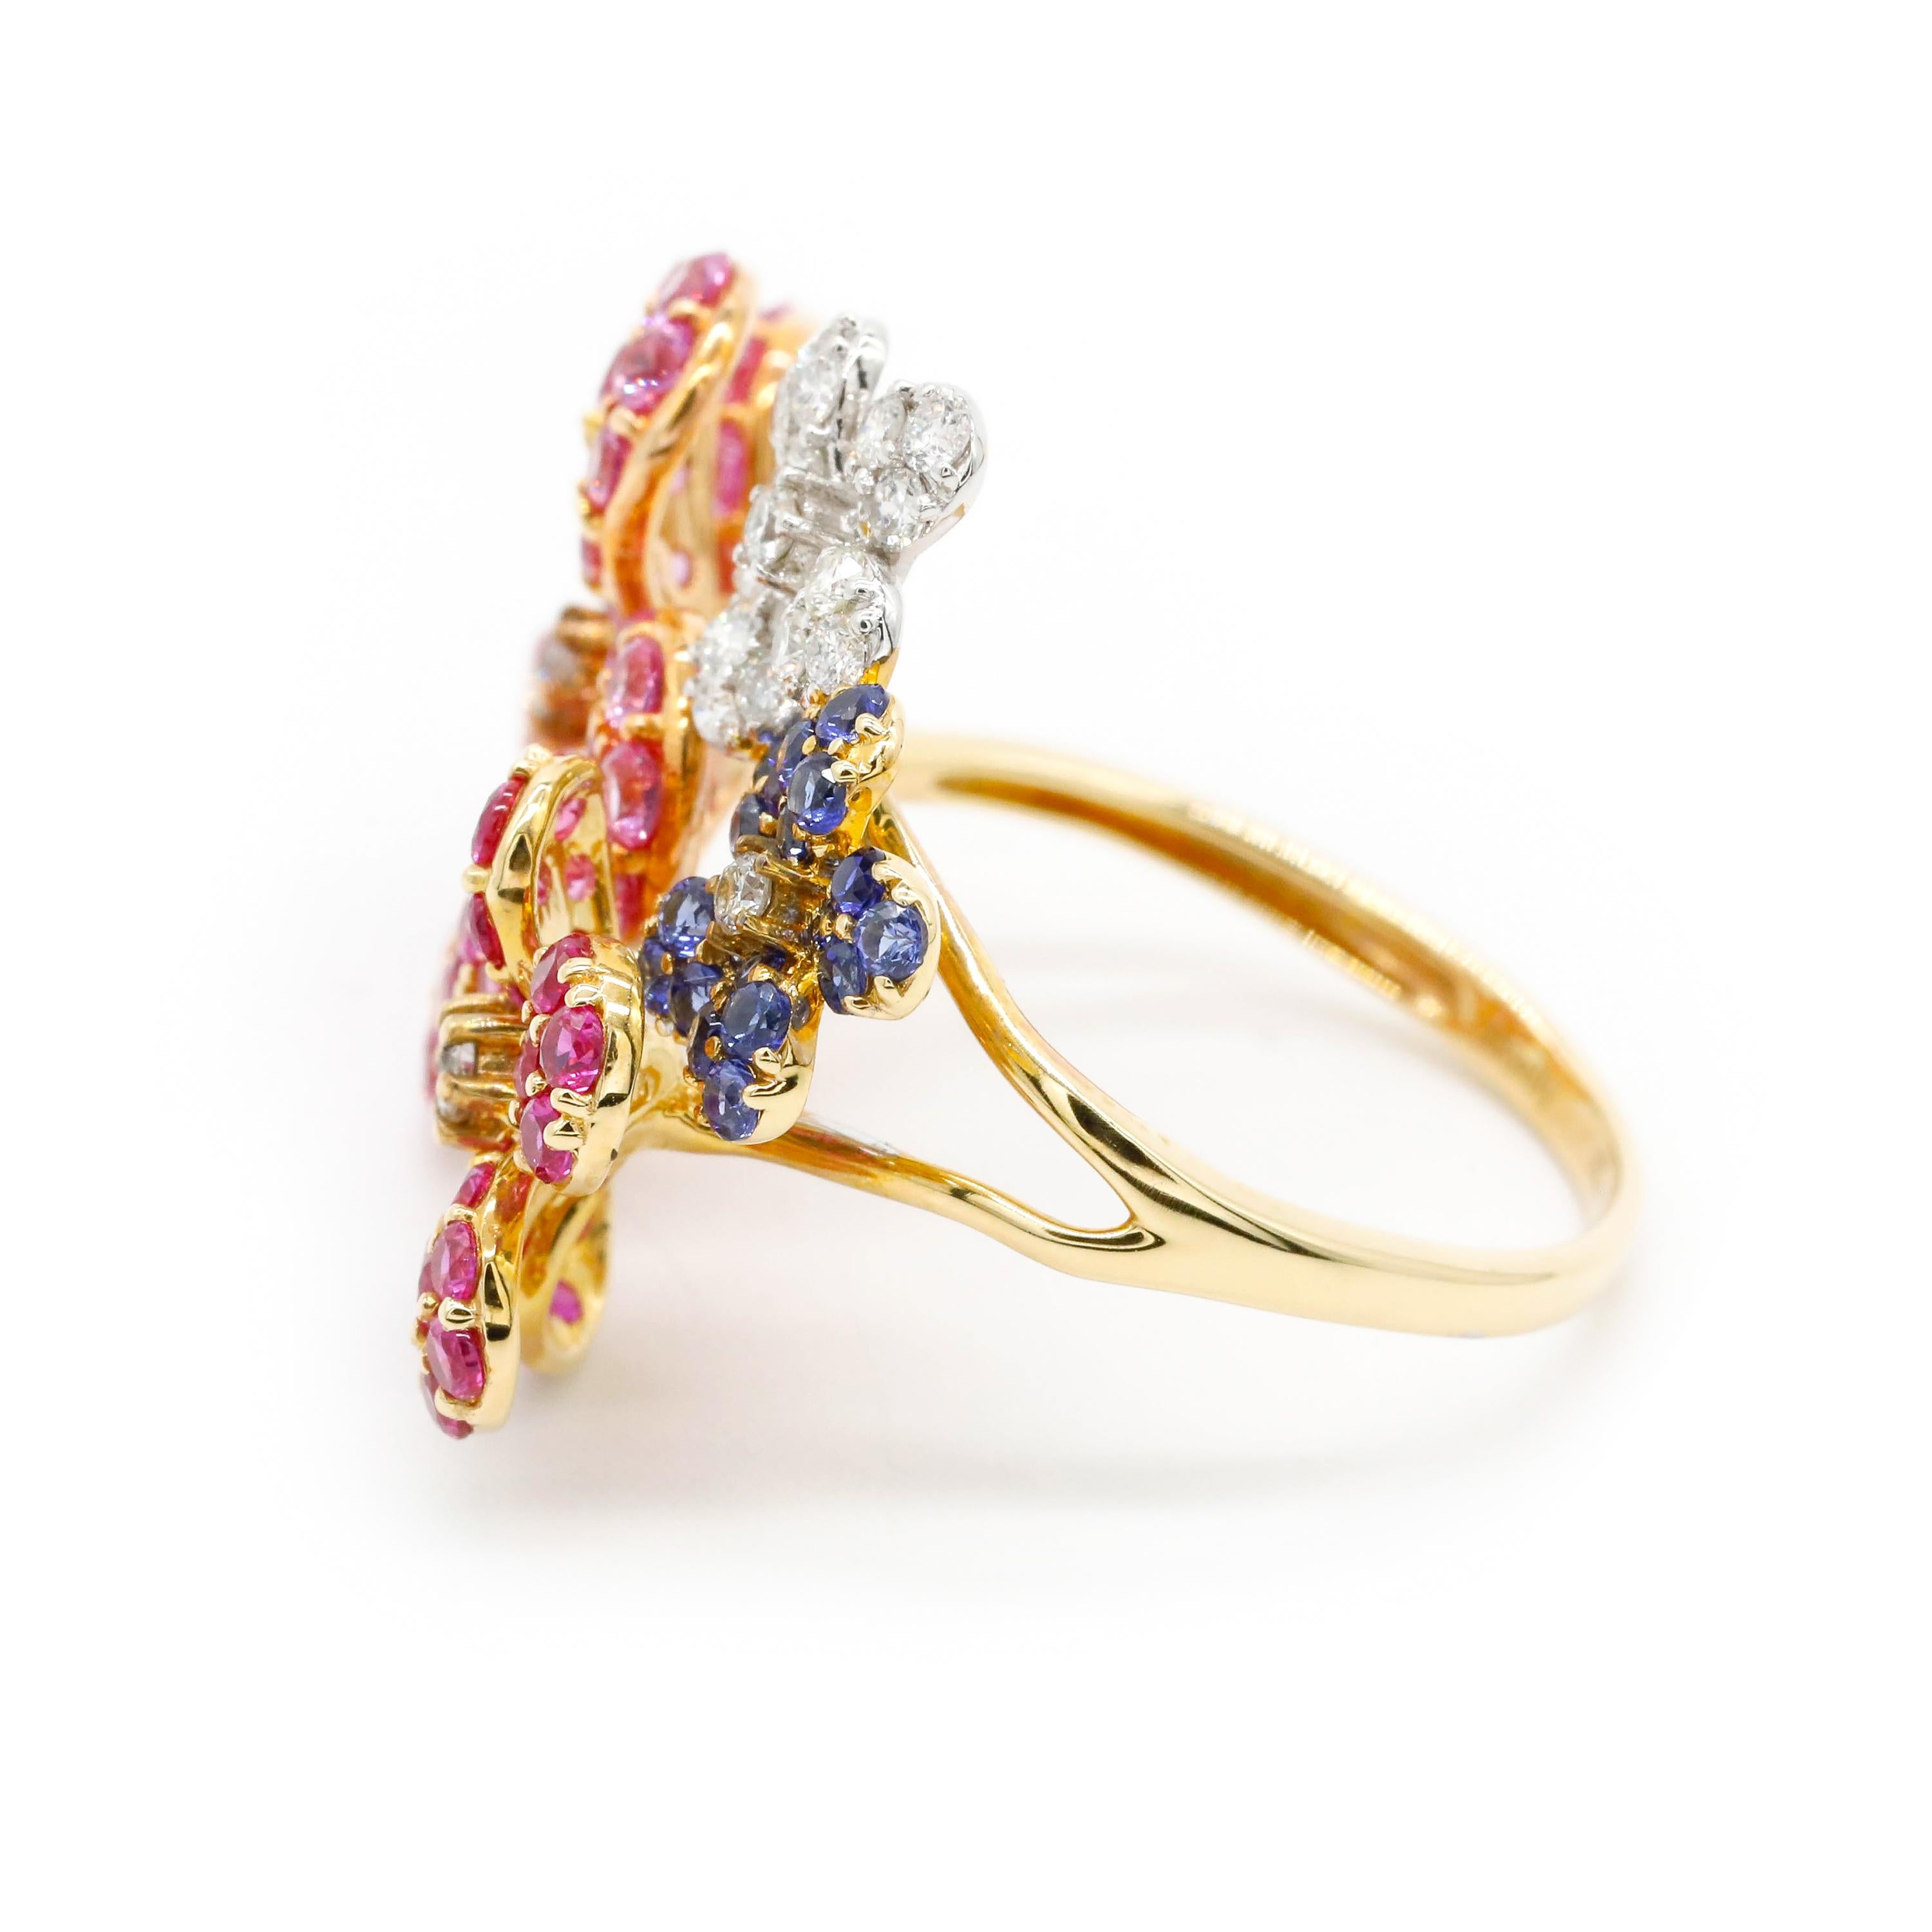 3.18 Carat Diamond Ruby Four Flower Blue Sapphire 14K Yellow Gold Floral Ring

This modern ring features a total of 0.37 carats of diamond round shape and 3.18 carats Blue Sapphire, Ruby and Pink Sapphire Gemstone Set in 14K Yellow Gold.

We